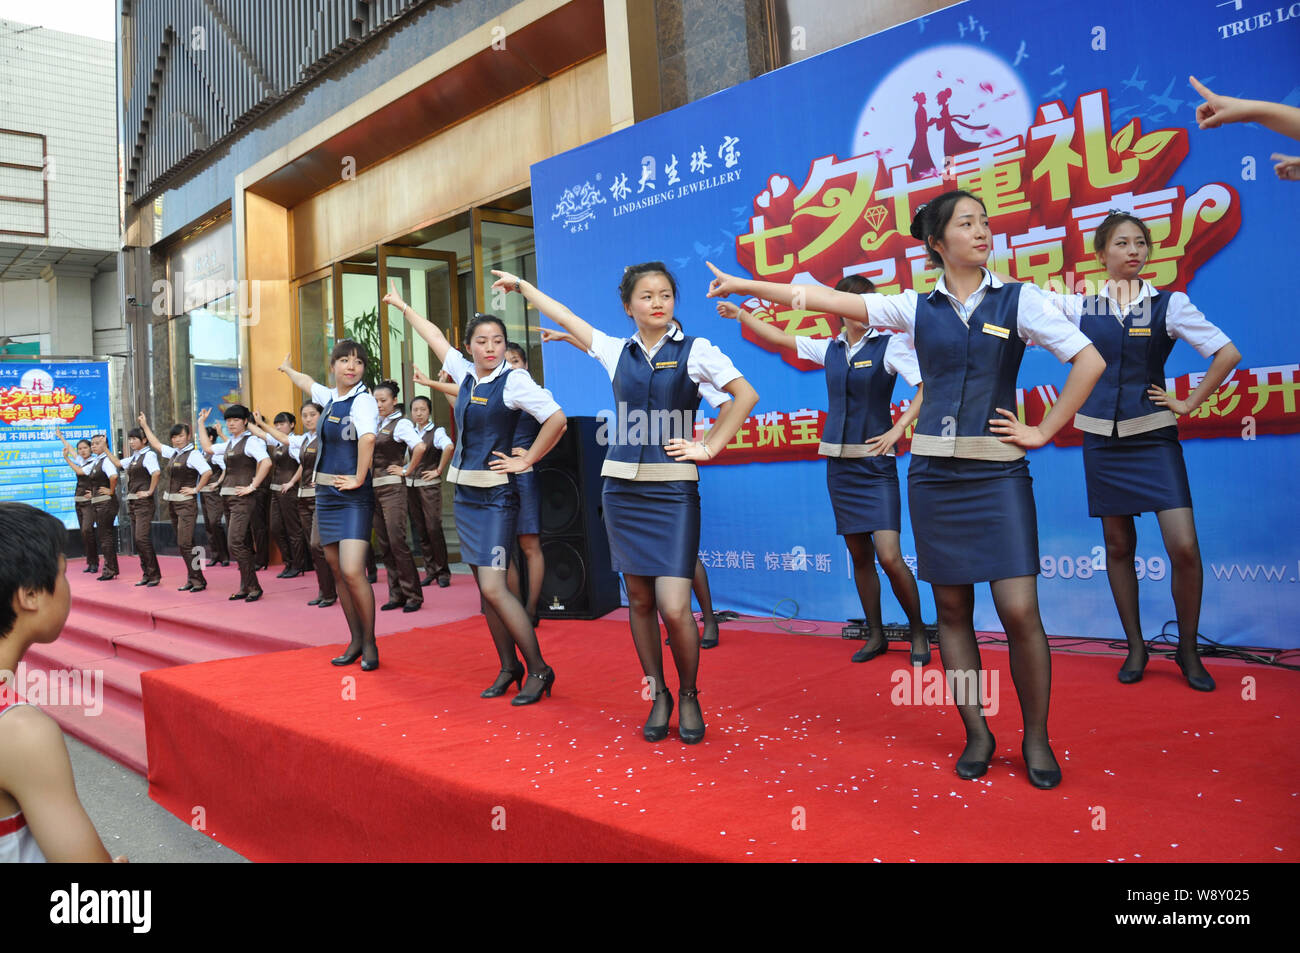 --FILE--Chinese employees dressed in uniforms dance to the music of Little Apple in front of a store in Shenyang city, northeast Chinas Liaoning provi Stock Photo